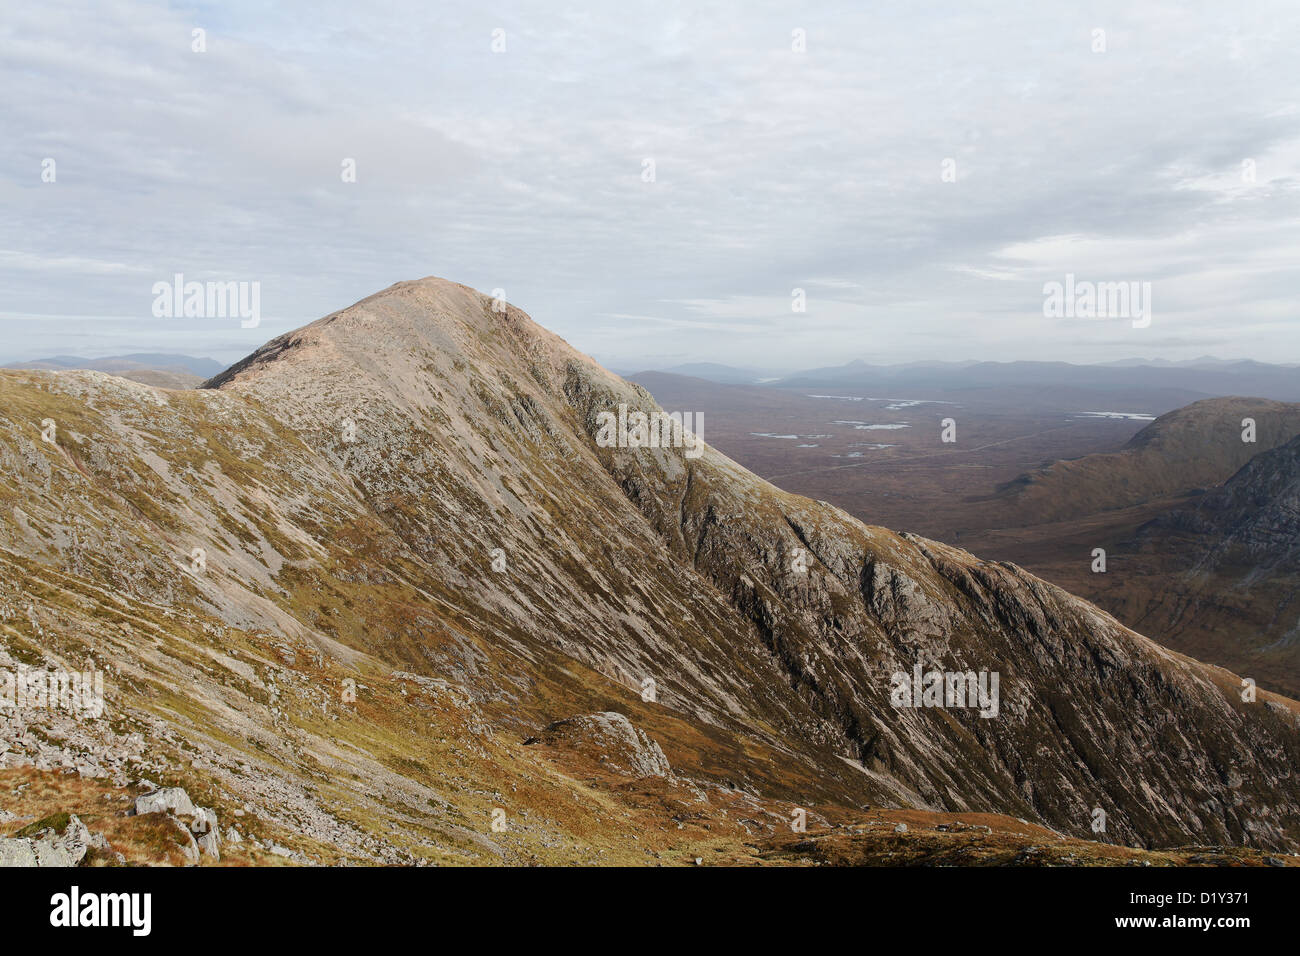 View of Stob Dearg (Buachaille Etive Mor) with Rannoch Moor beyond Stock Photo